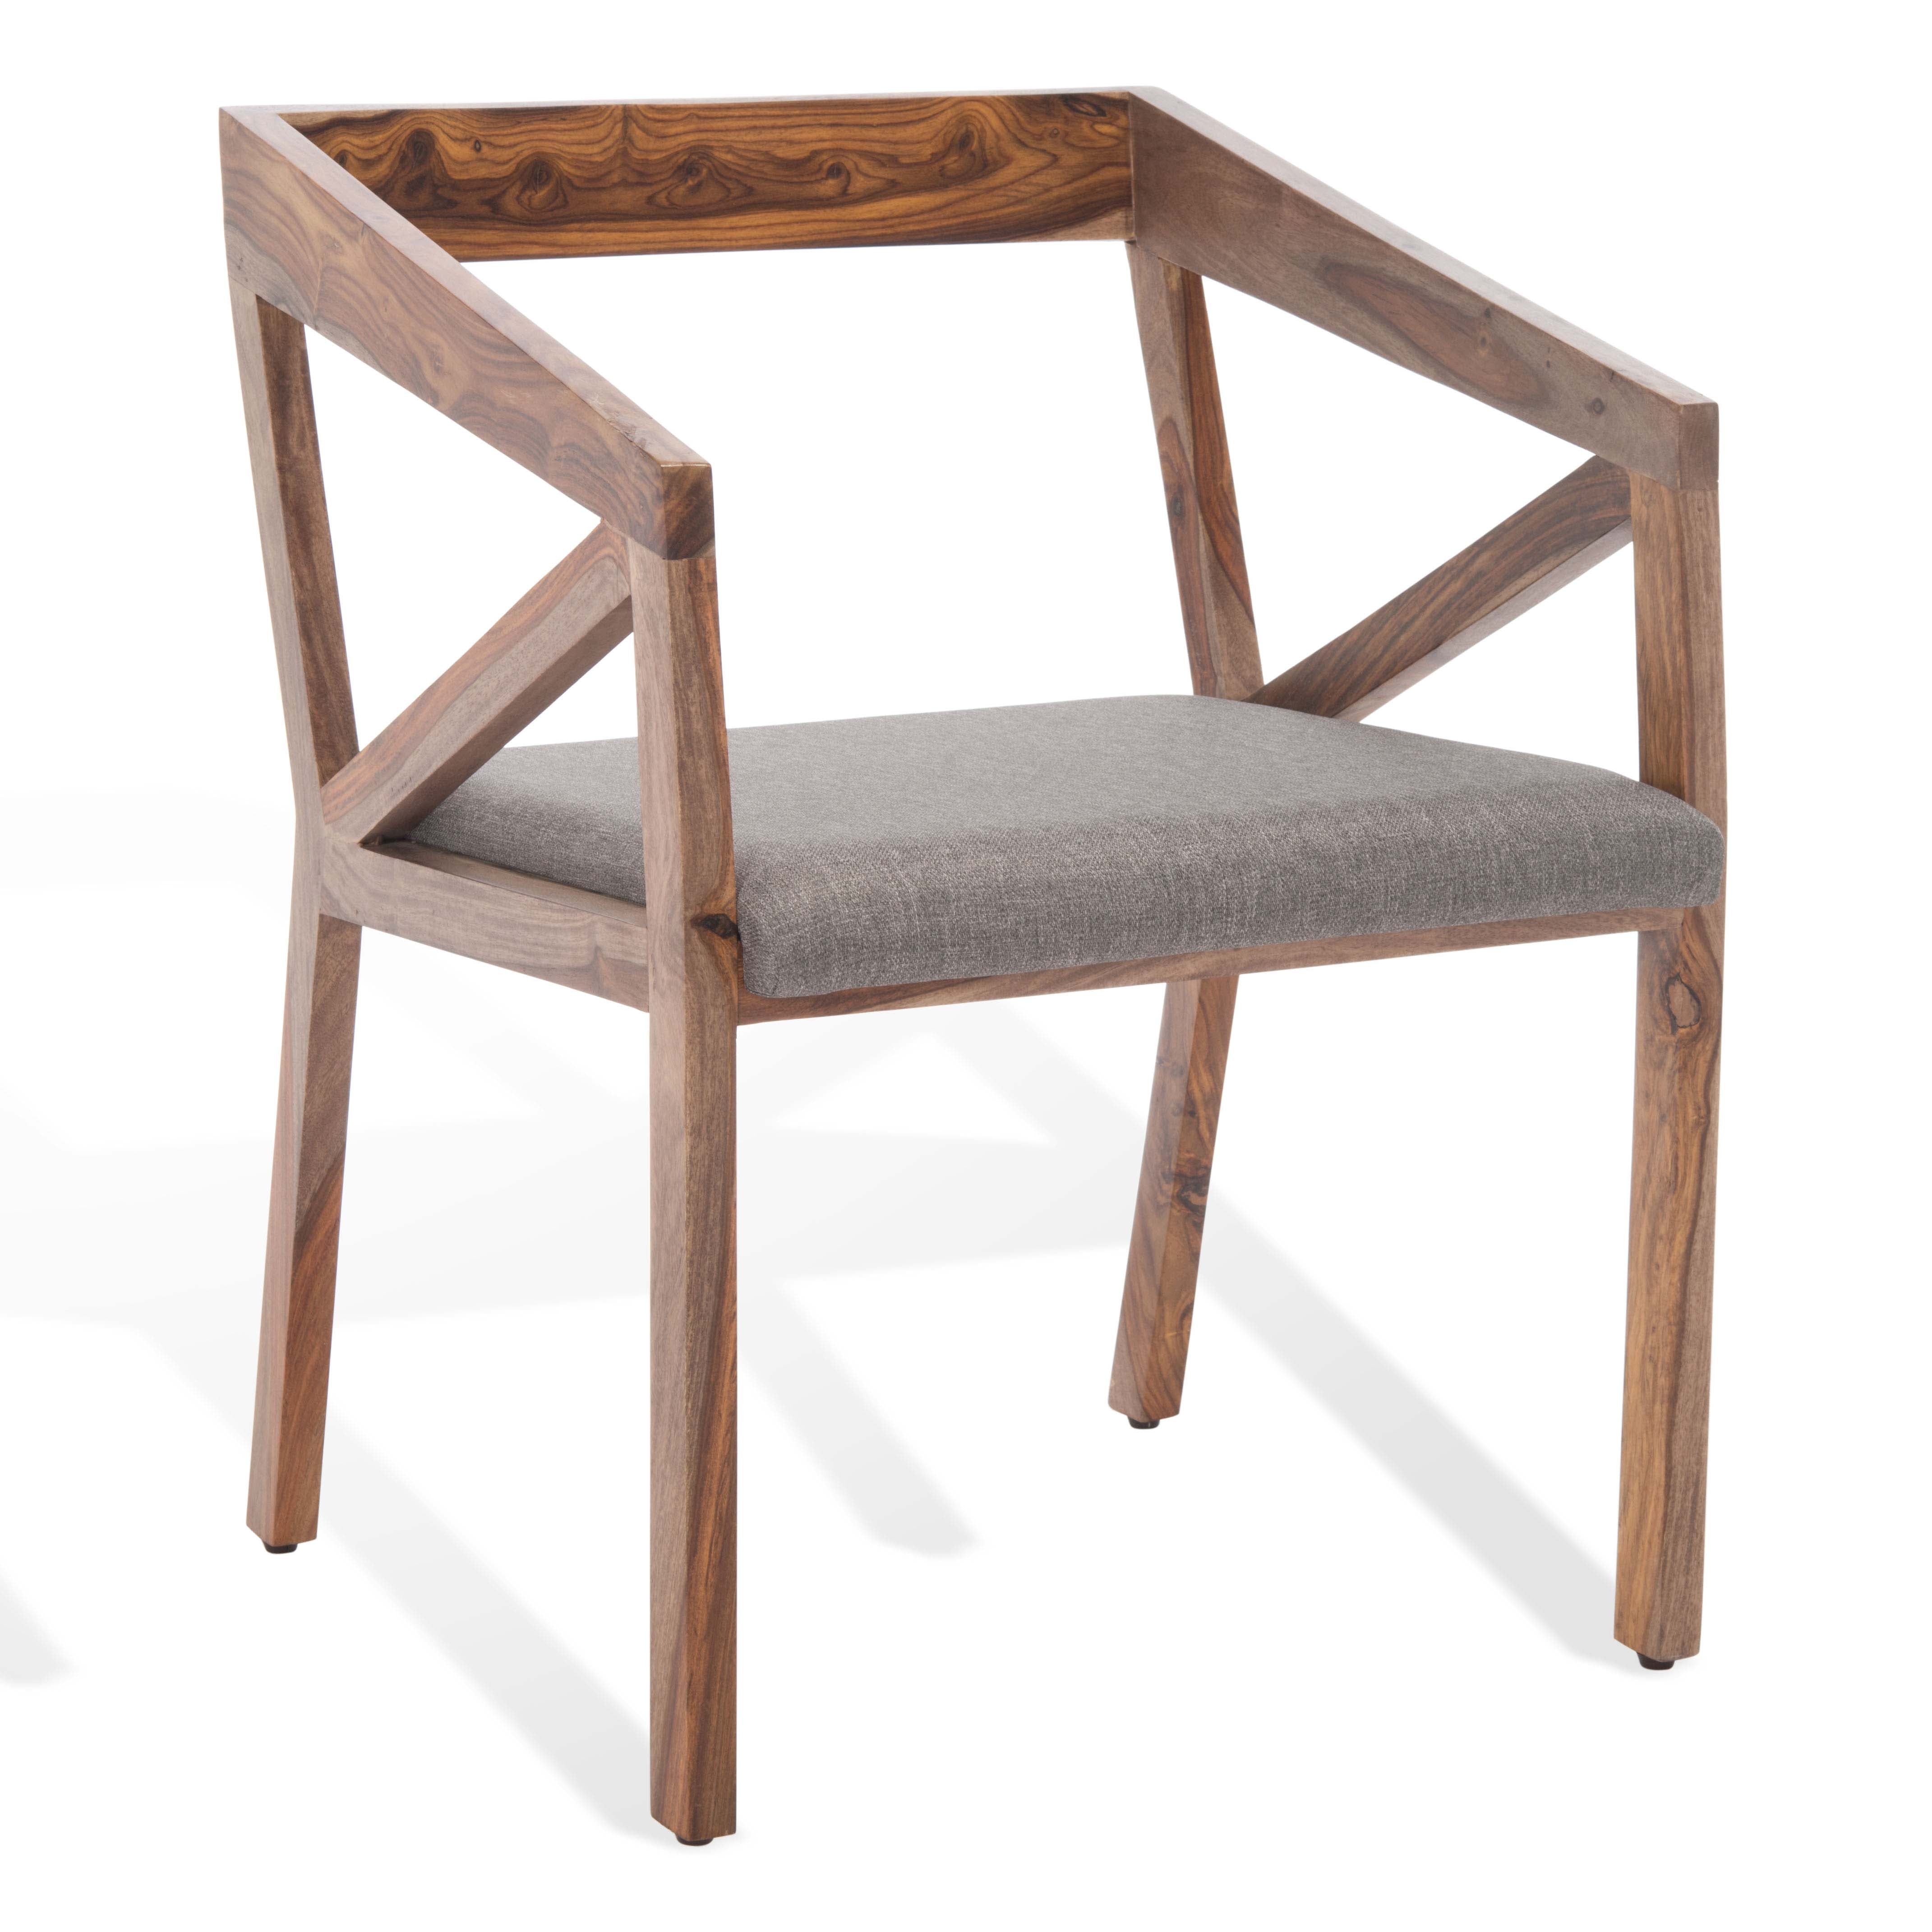 Safavieh Couture Khloe Wood Dining Chair - Natural / Grey